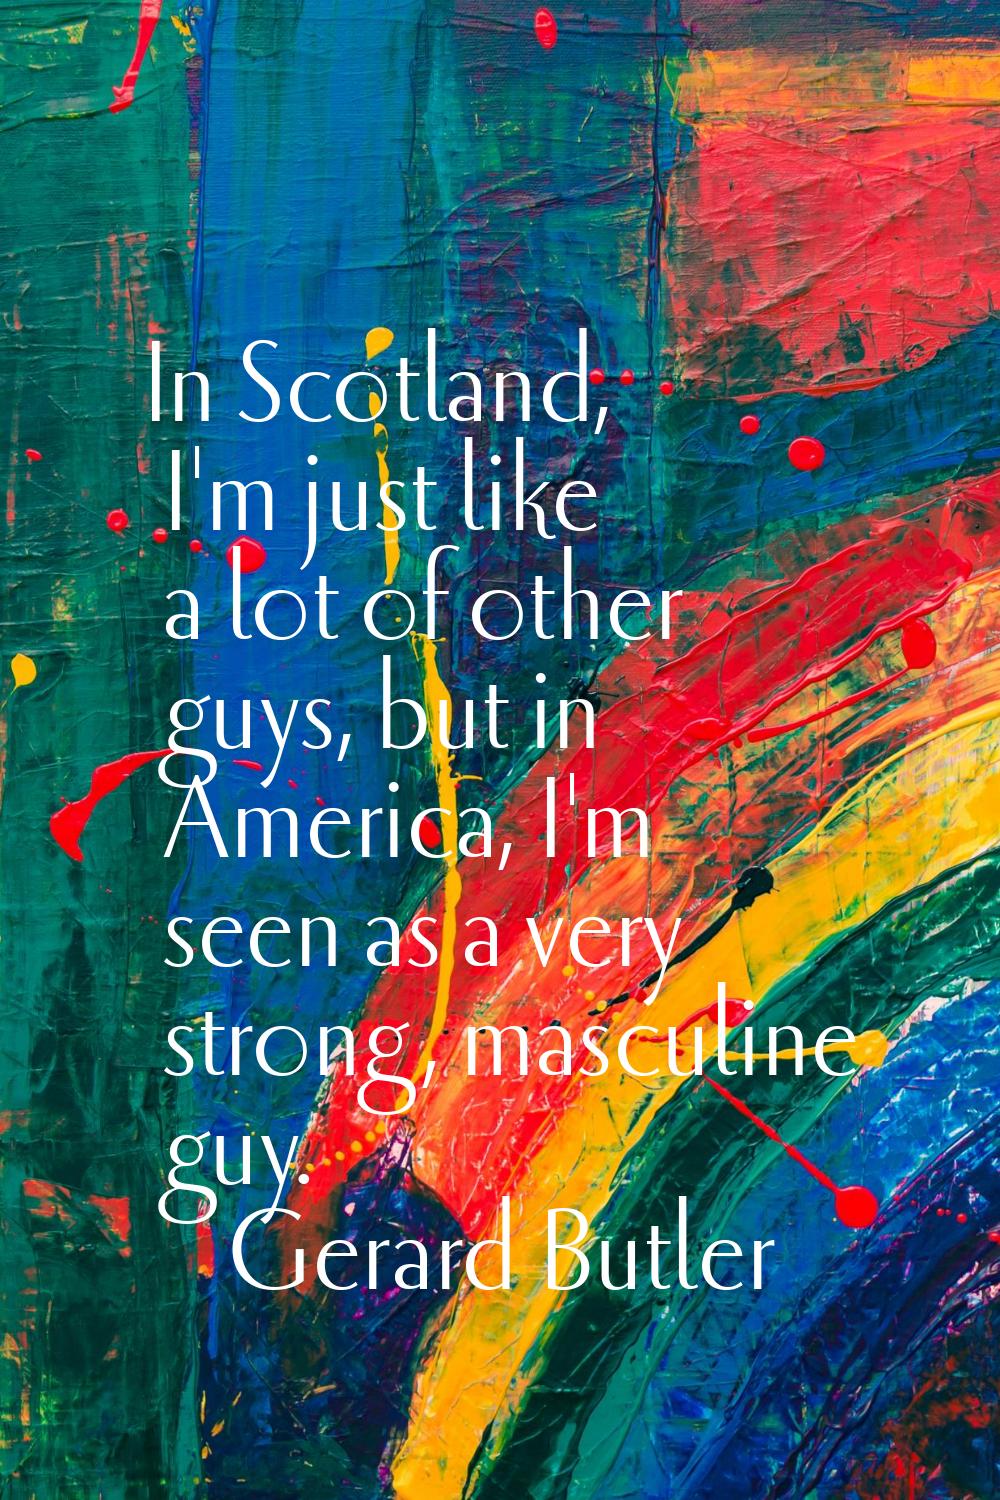 In Scotland, I'm just like a lot of other guys, but in America, I'm seen as a very strong, masculin